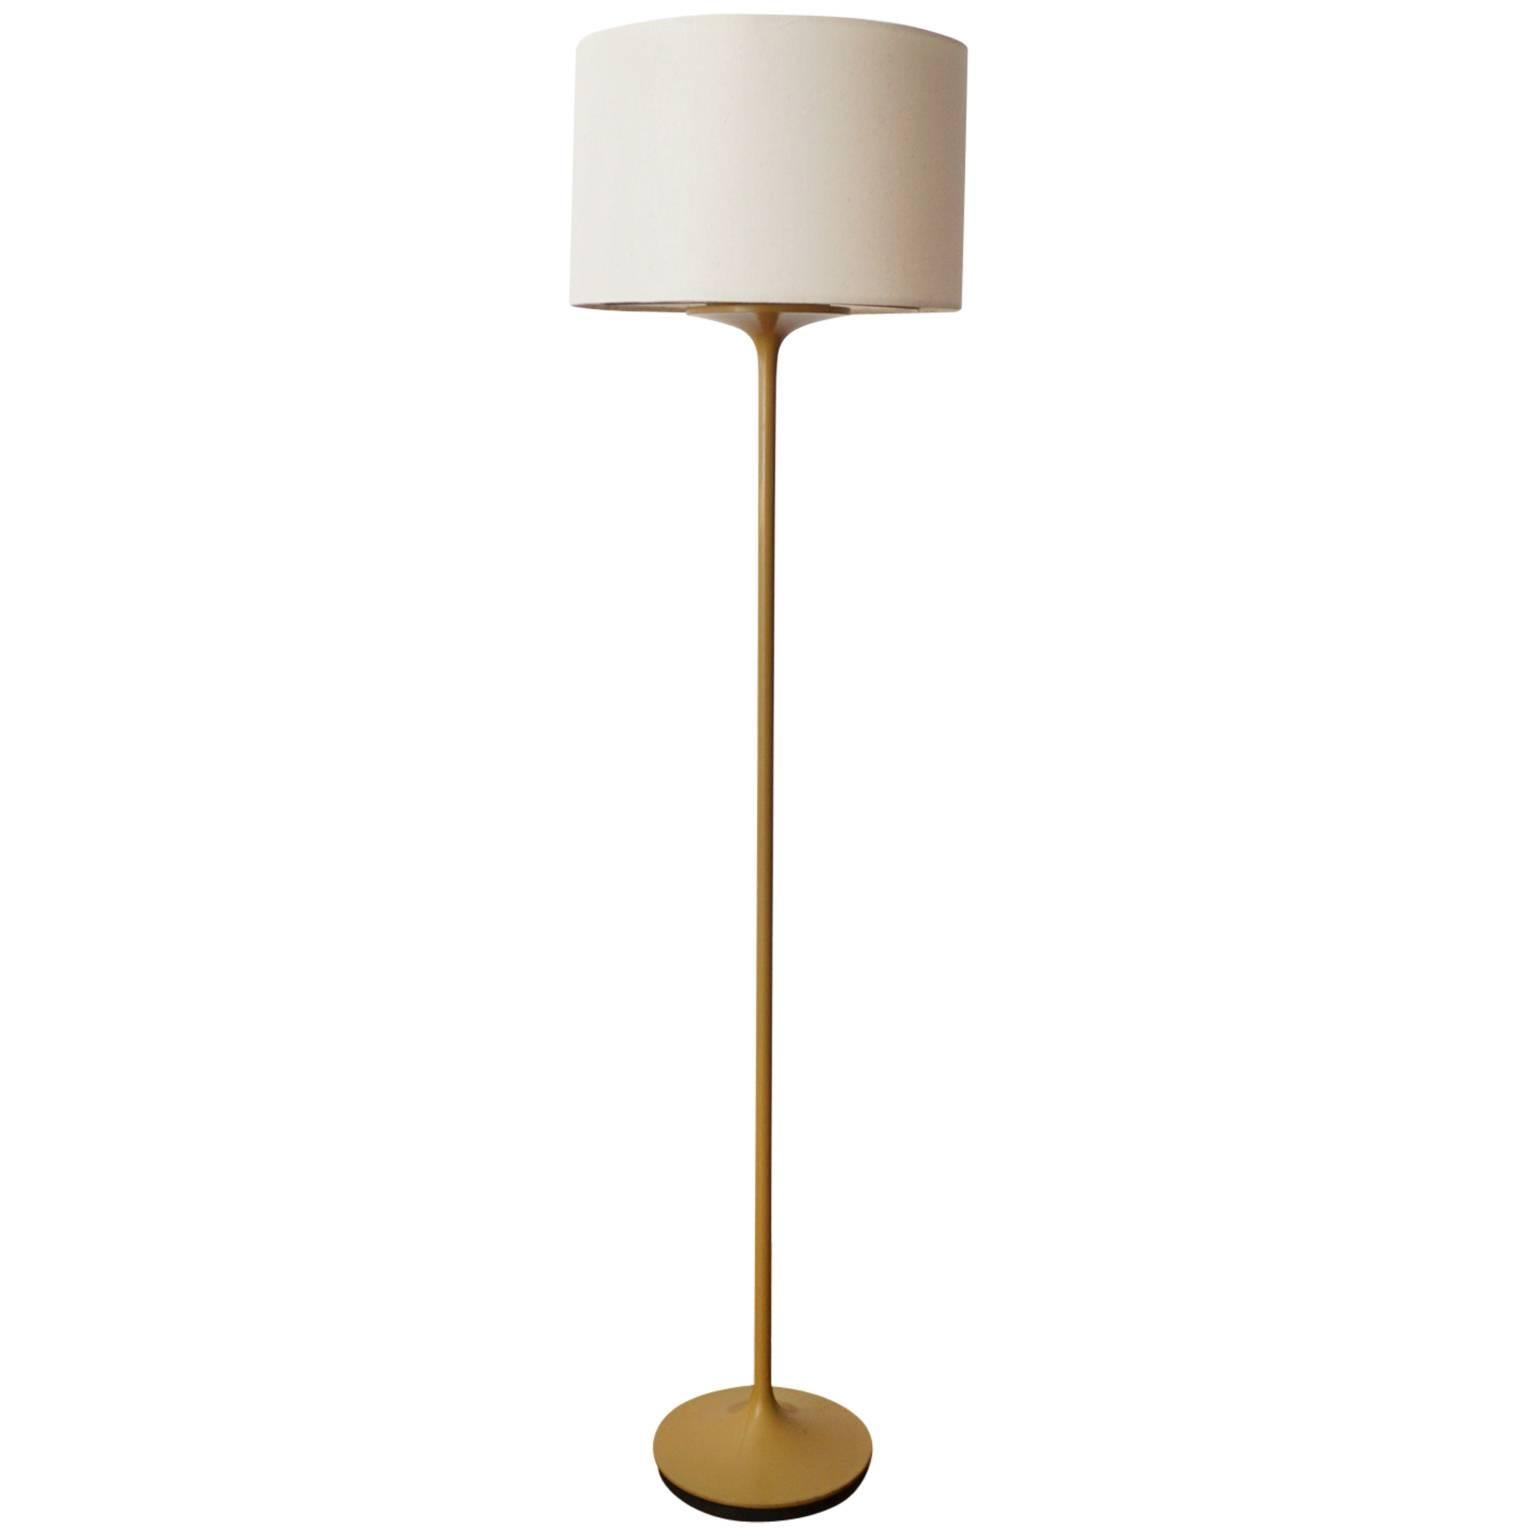 1960s Design Line Floor Lamp by Bill Curry